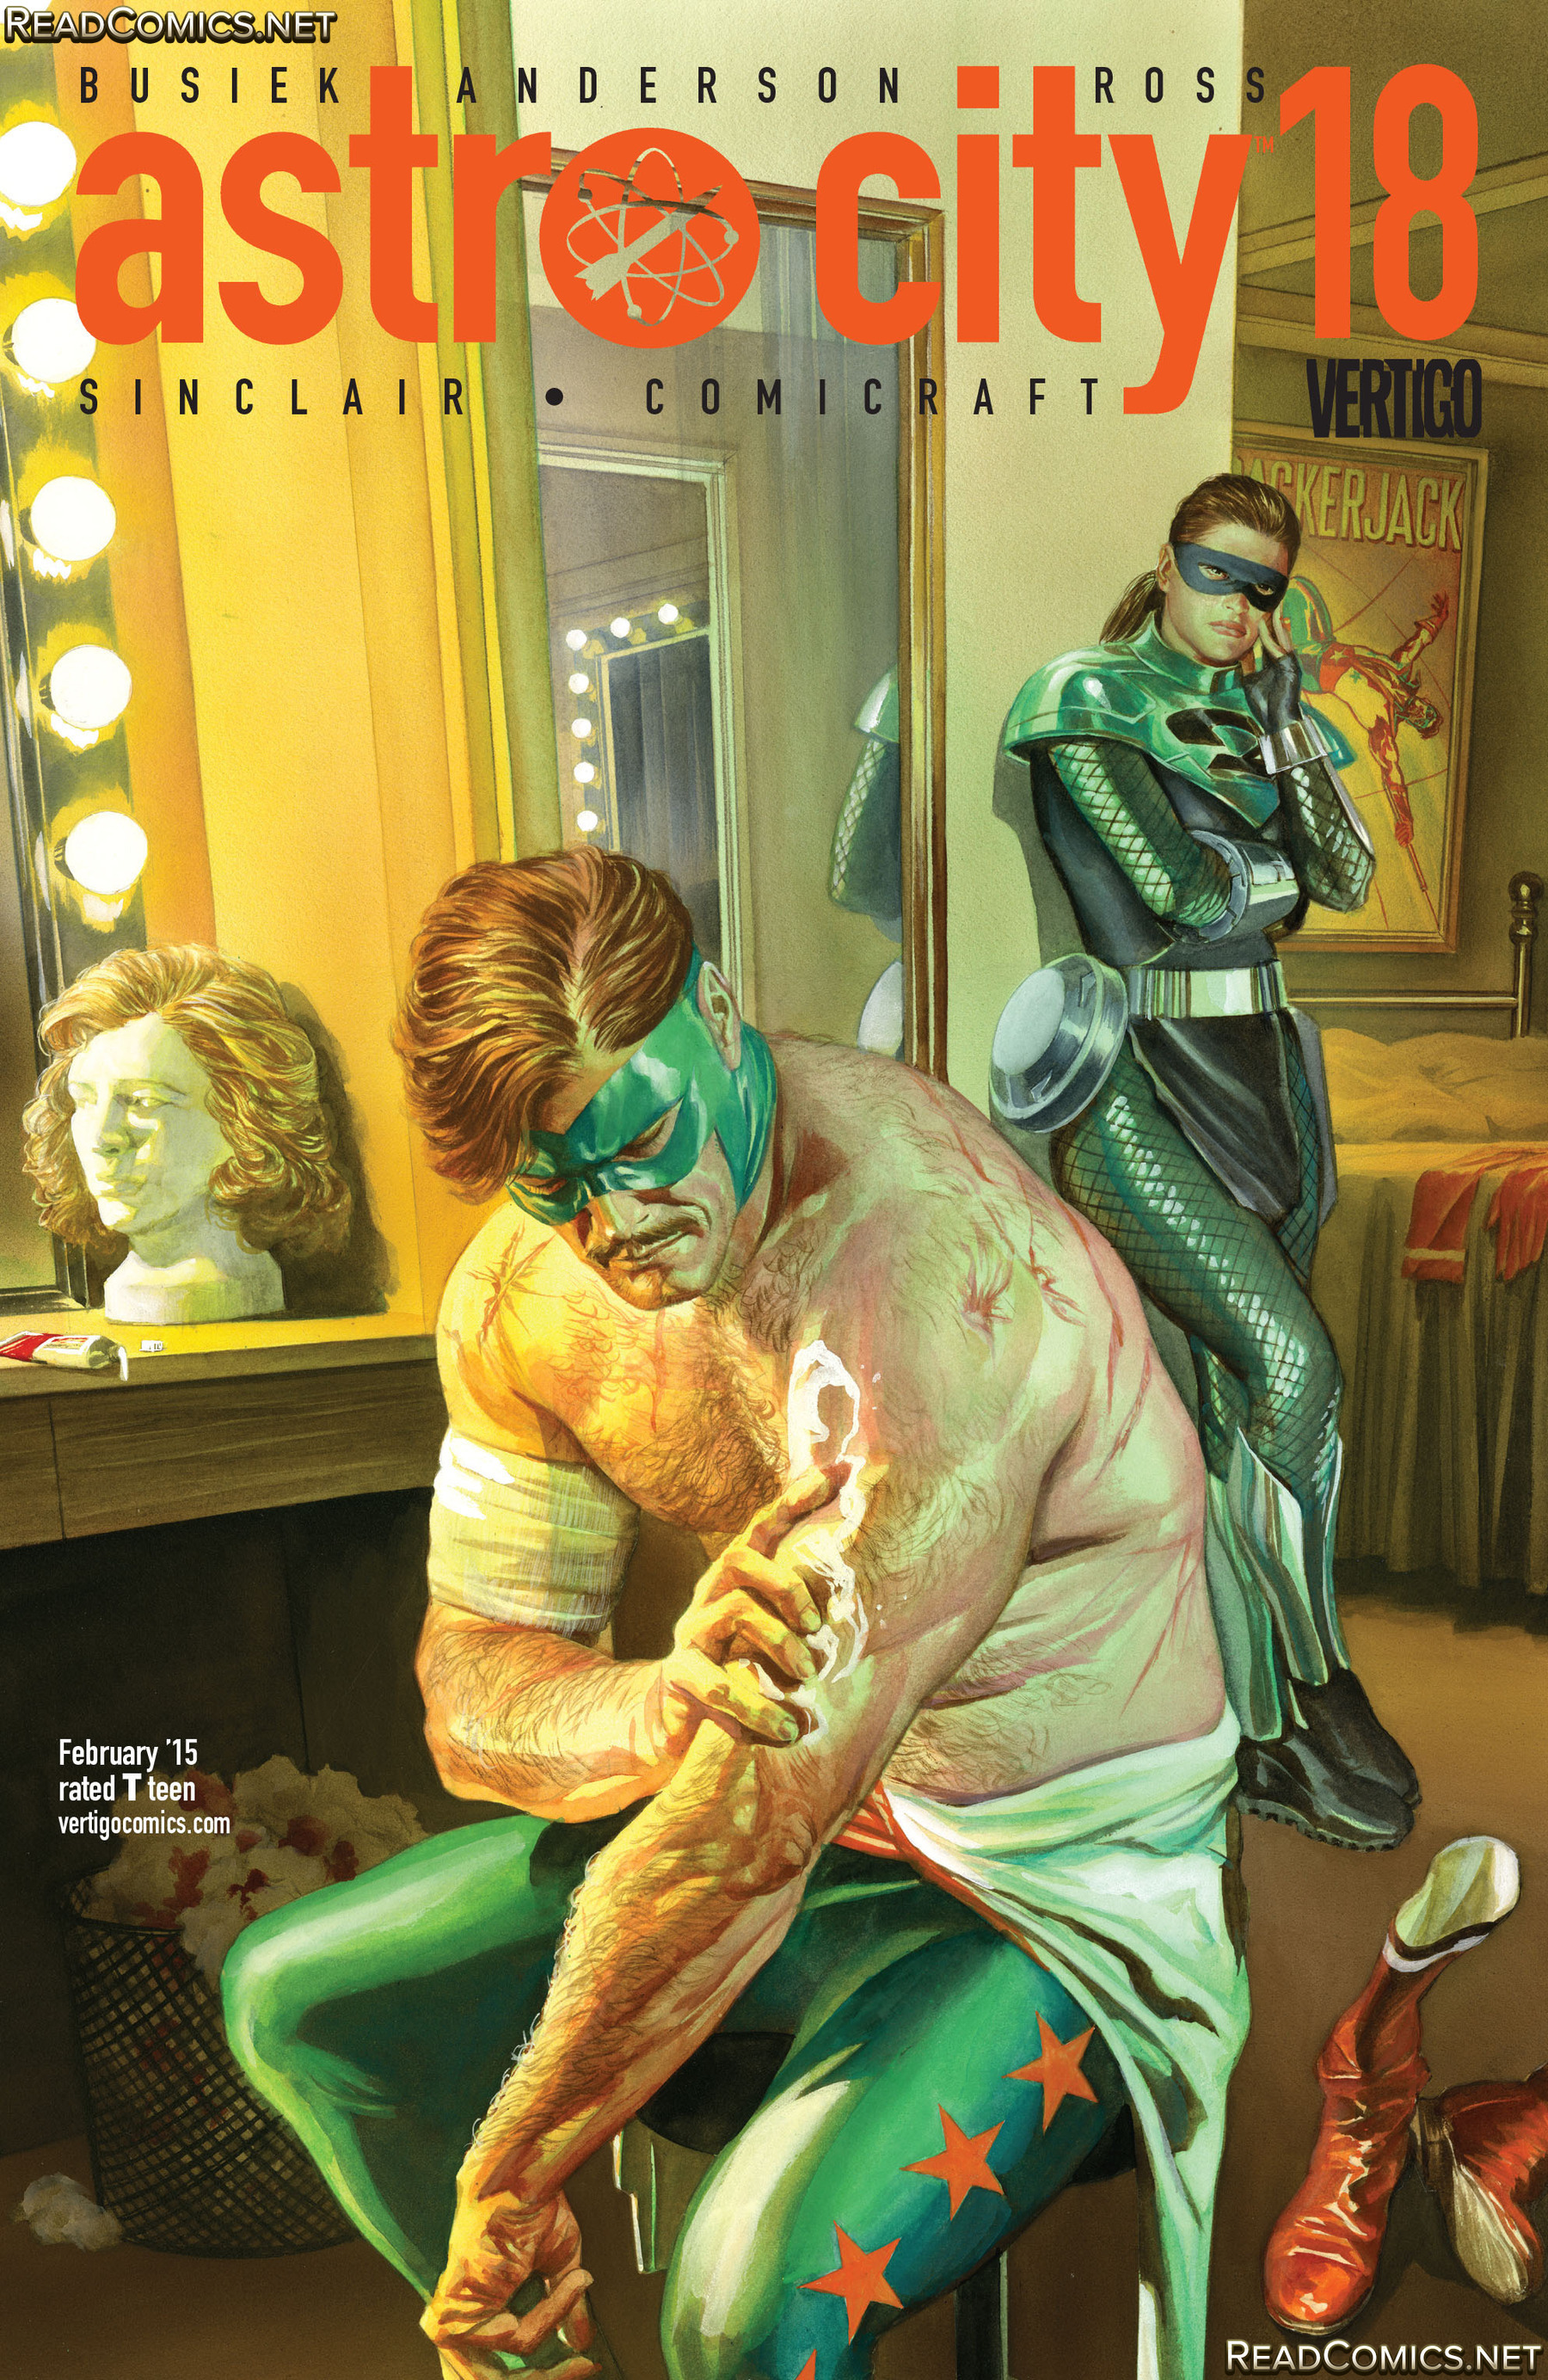 Astro City (2013-): Chapter 18 - Page 1